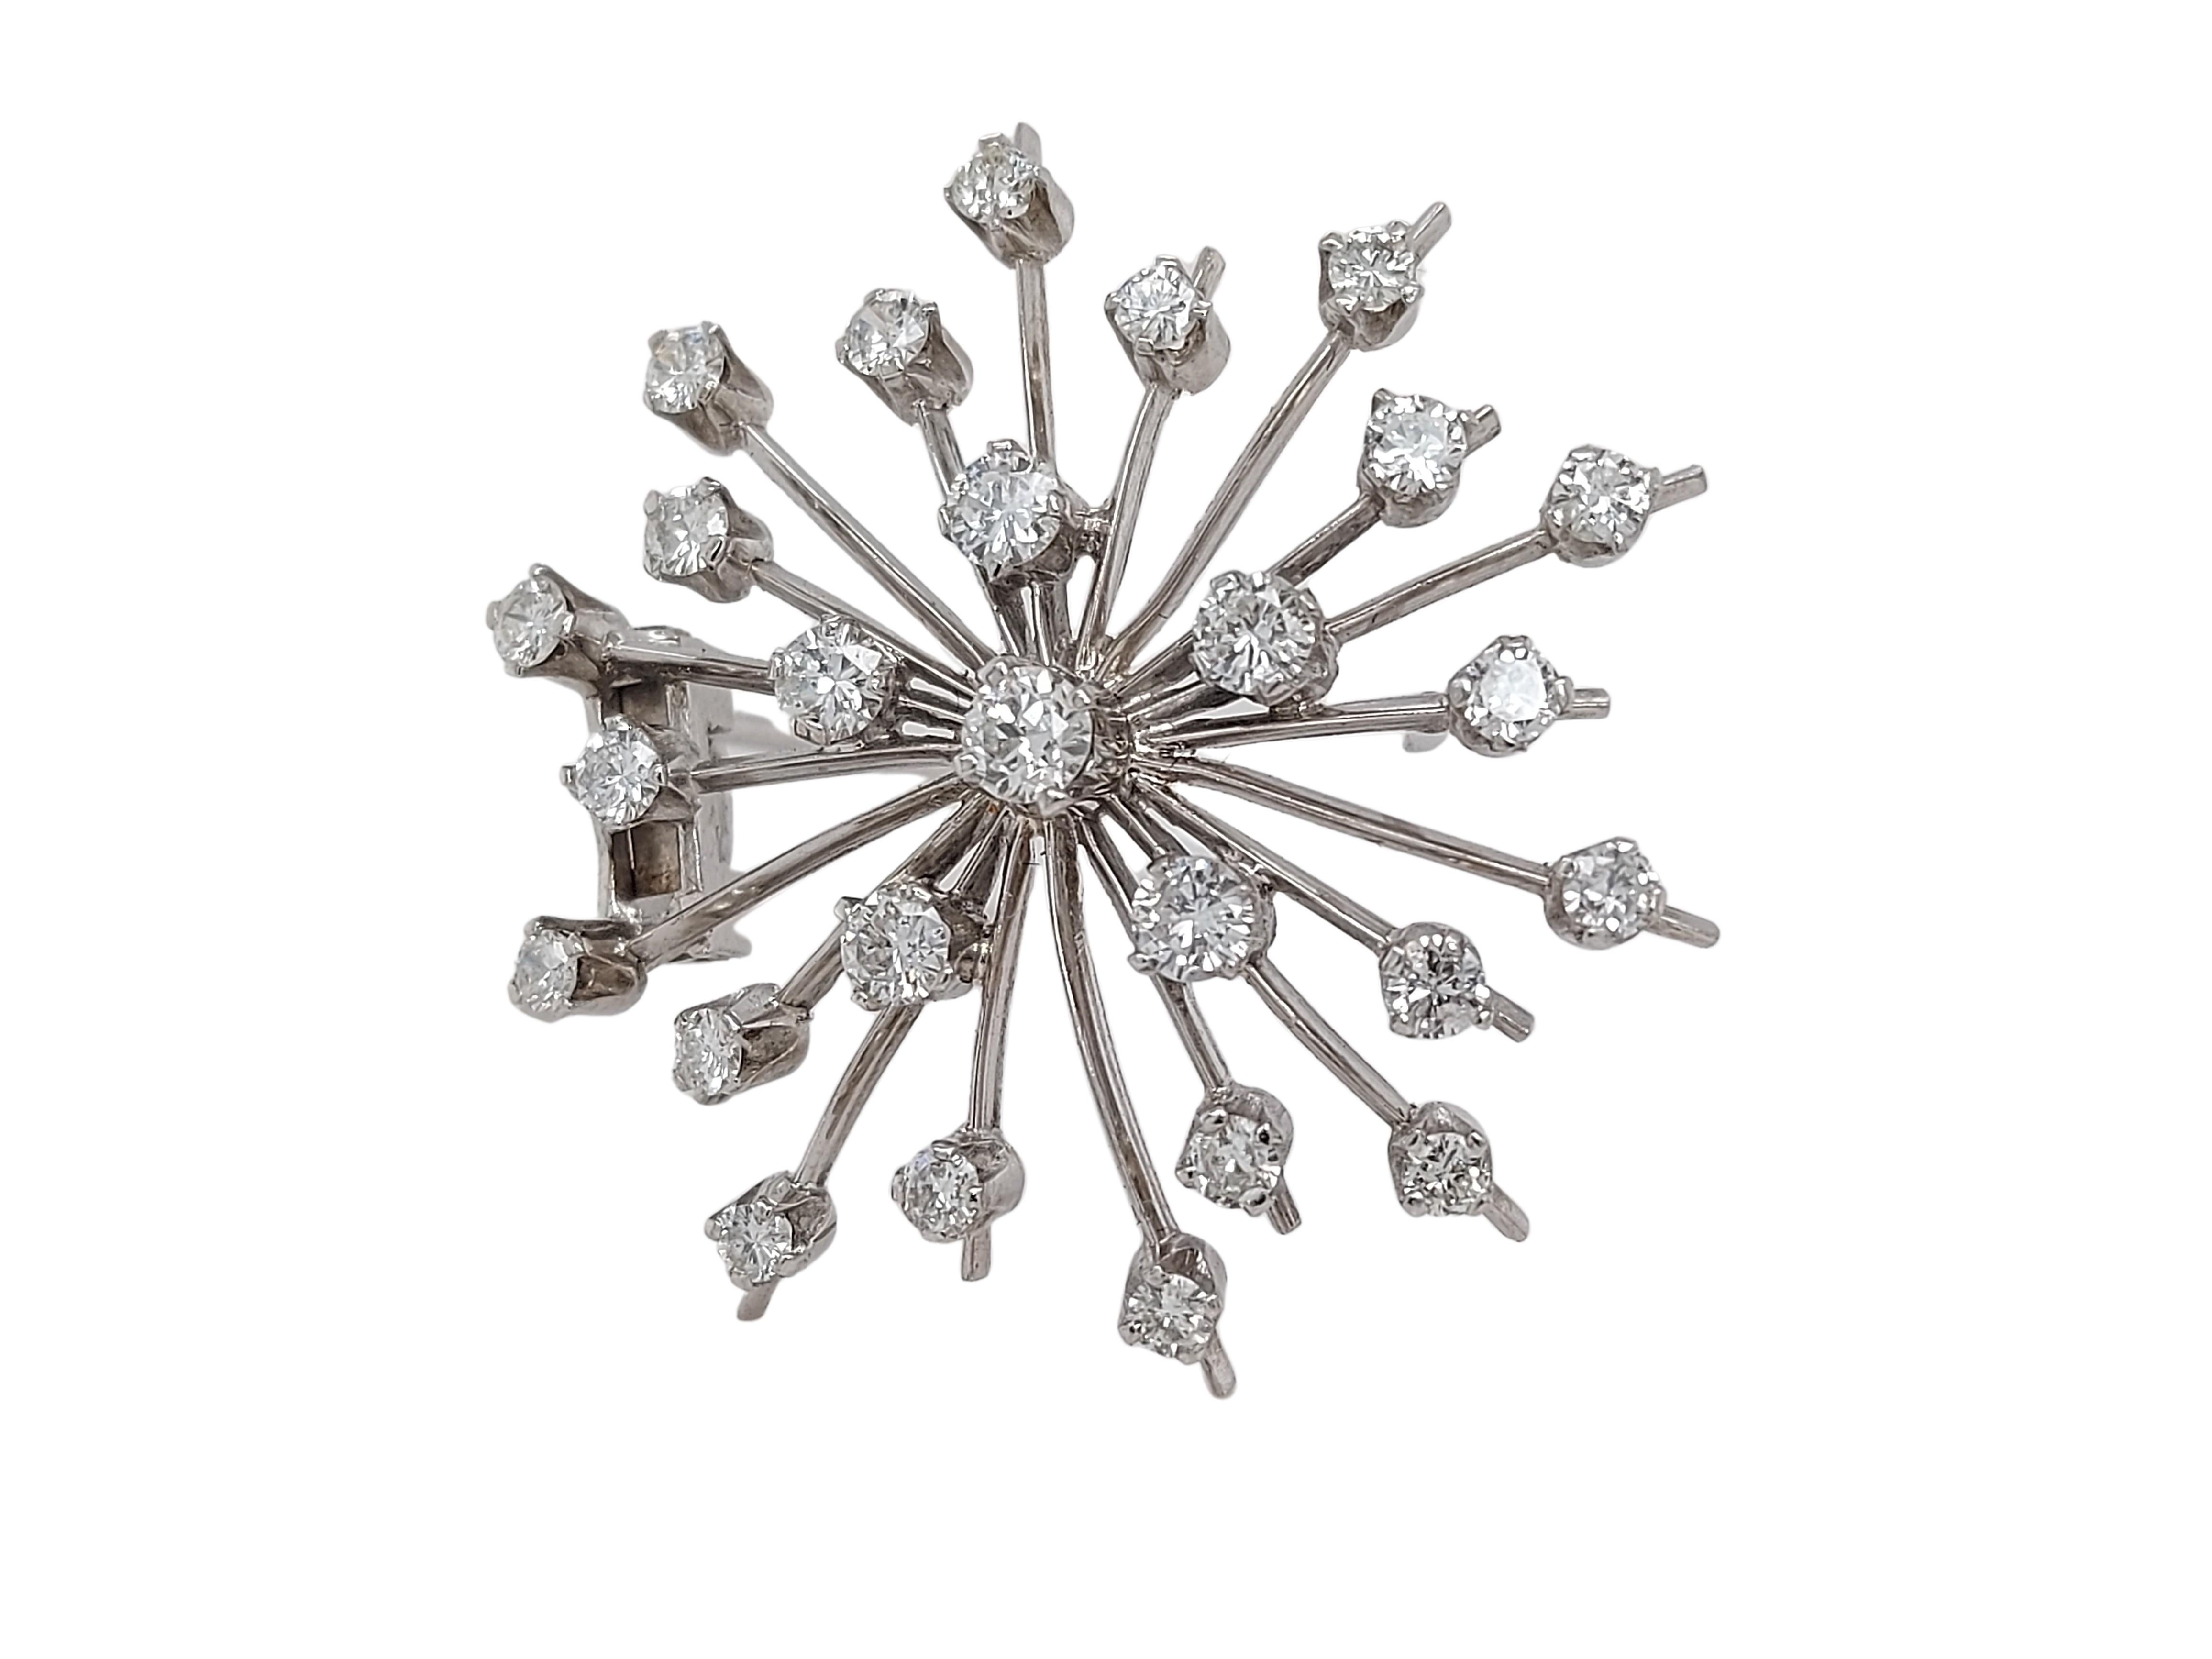 Stunning Attractive 18kt White Gold 2.95ct Diamond Star Brooch 

Material: 18kt white gold

Diamonds: brilliant cut diamonds, 2.75ct plus a centre diamond of 0.20ct, E/F color

Measurements: Diameter 33 mm

Total weight: 6.50 grams / 4.20 dwt /